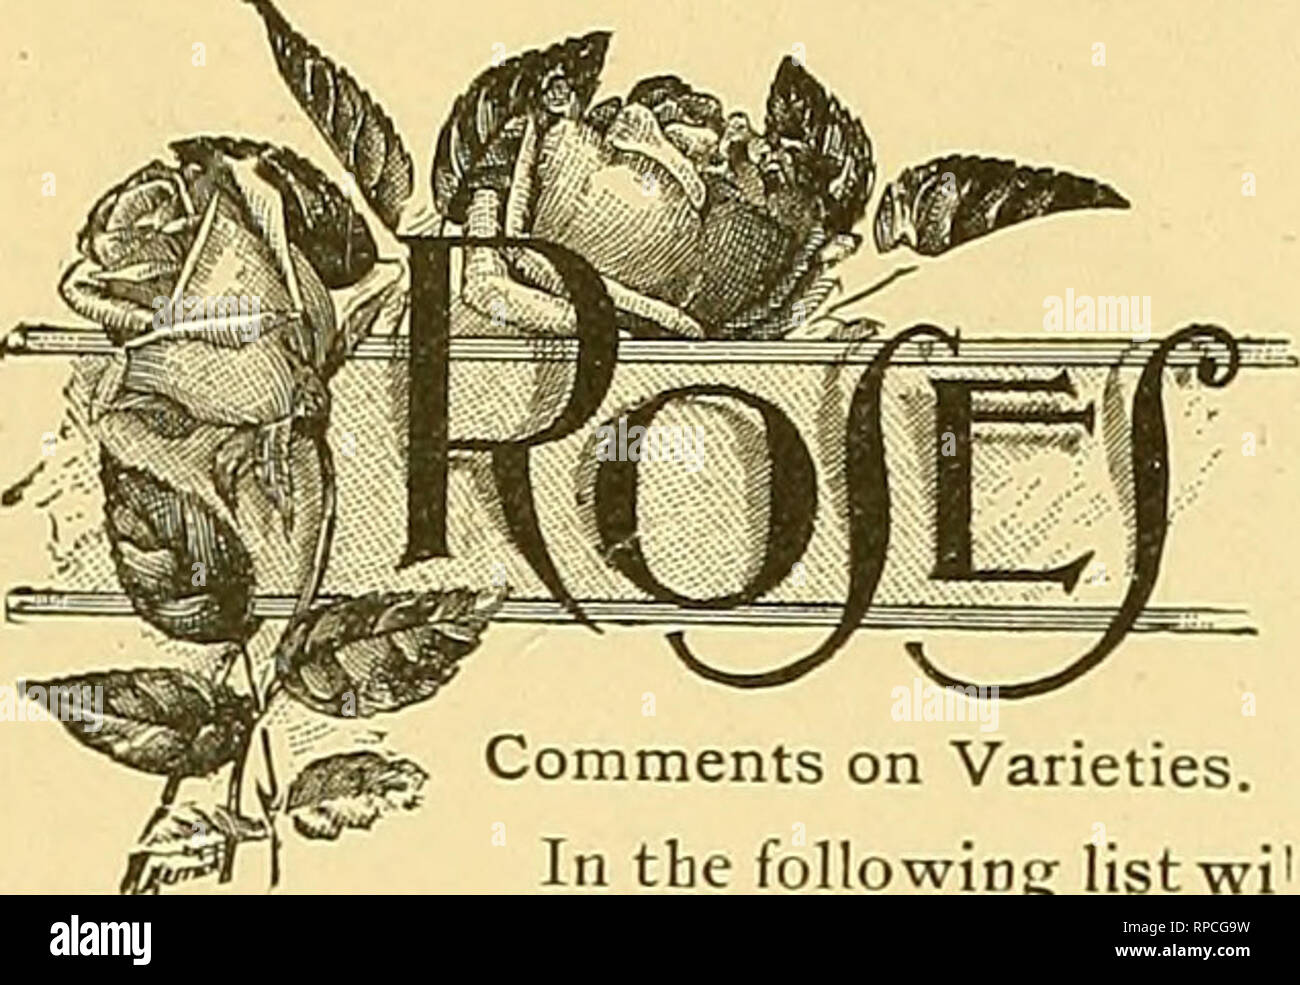 . The American florist : a weekly journal for the trade. Floriculture; Florists. EmErica is &quot;the Prow nl the IIbssbI; thers may be more comfort Mmidships, but we etb the Rrst to touch Unknown Seas.' Vol. VIII. CHICAGO AND NEW YORK, MARCH 30, 1893. No. 252 f LHIIE /4eS!llB!0@M! lFl!=@L@l!@? Published every Thursday by The American florist Compahy. Subscription, Jl.OO a year. To Europe, S2.00. Address all communications to AMERICAN FLORIST COMPANY, 333 Dearborn Street, CHICAGO. Kiisterii Offlie: 67 Hromfleld .St., Boston. SOCIETY OF AMERICAN FLORISTS. Wm. R. Smith, Washington, D. C , presid Stock Photo